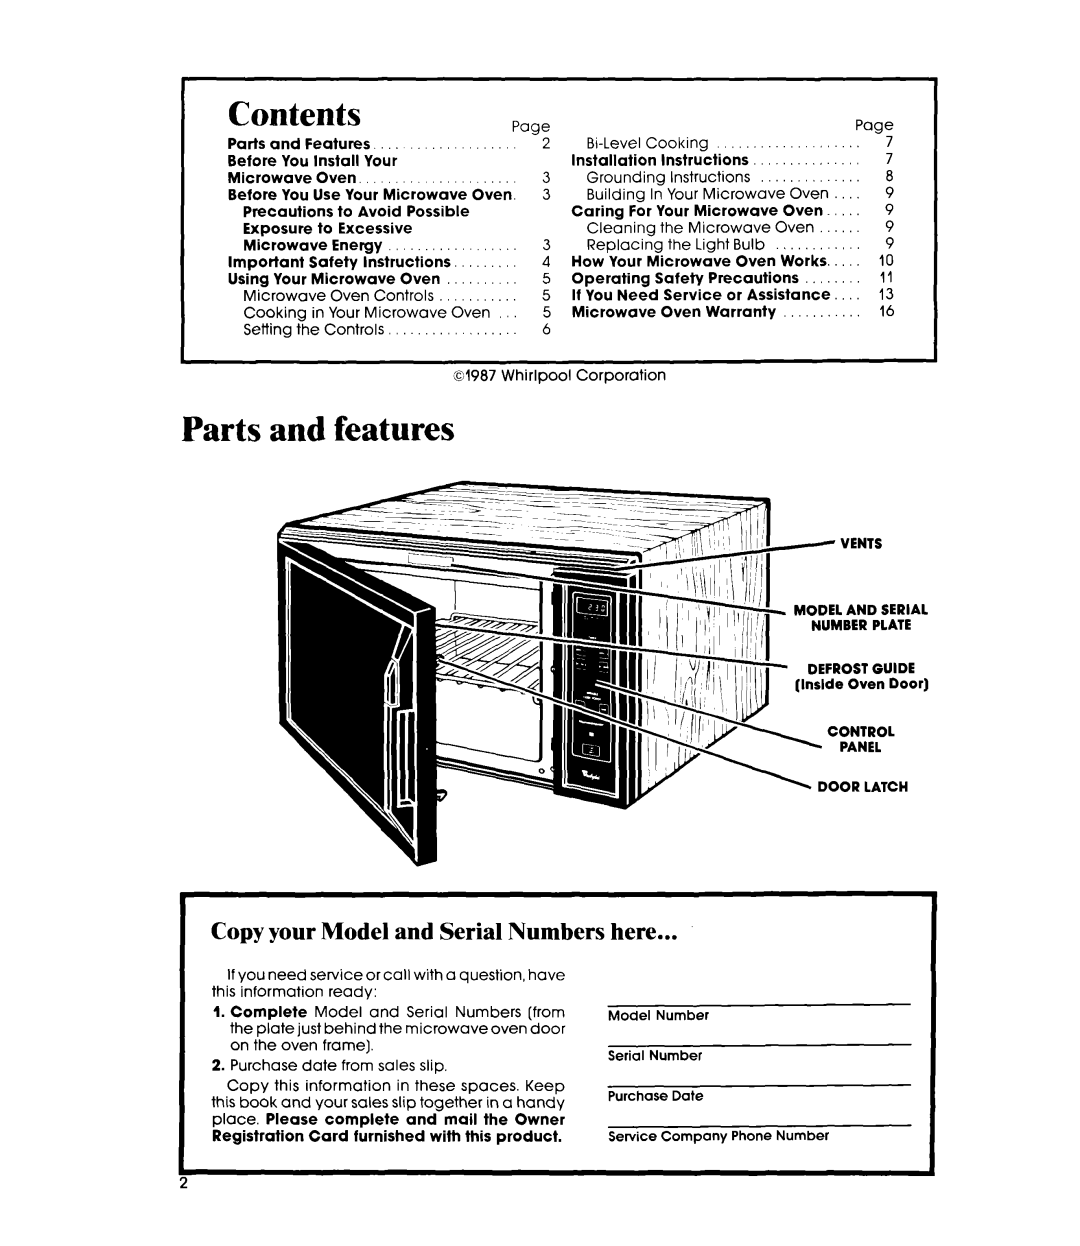 Whirlpool MW8500XS manual Contents, Parts and features, Copy your Model and Serial Numbers here 